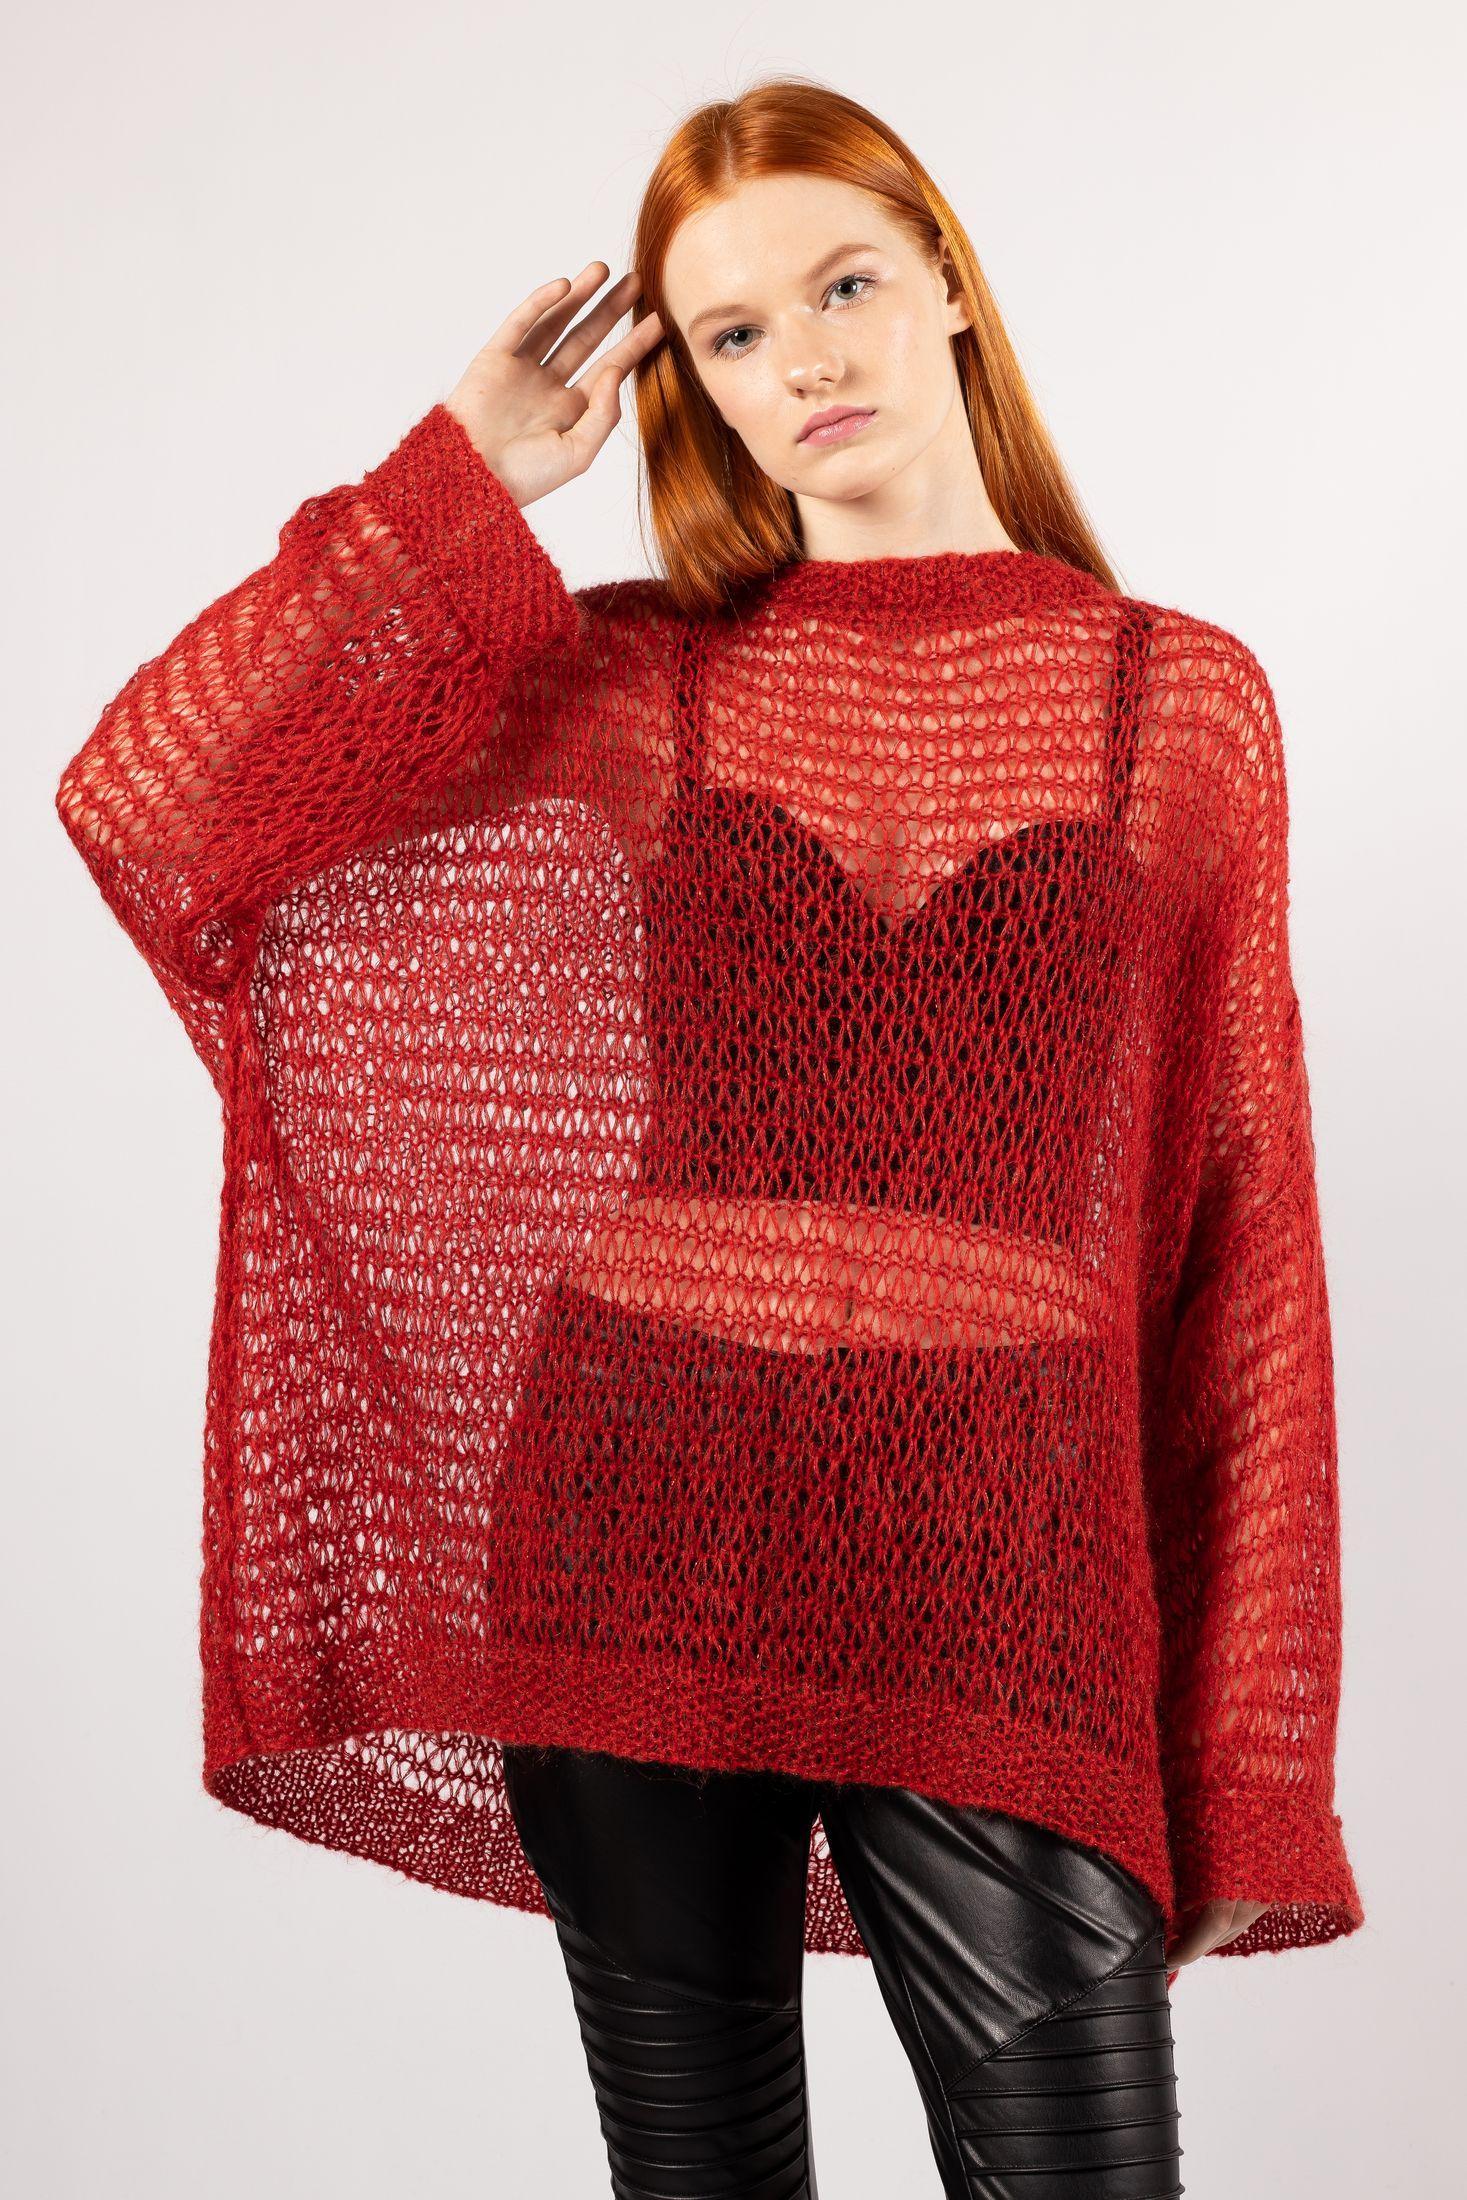 Stunning hand-knit red mohair tunic sweater with an open-loop design, part of the IDA collection